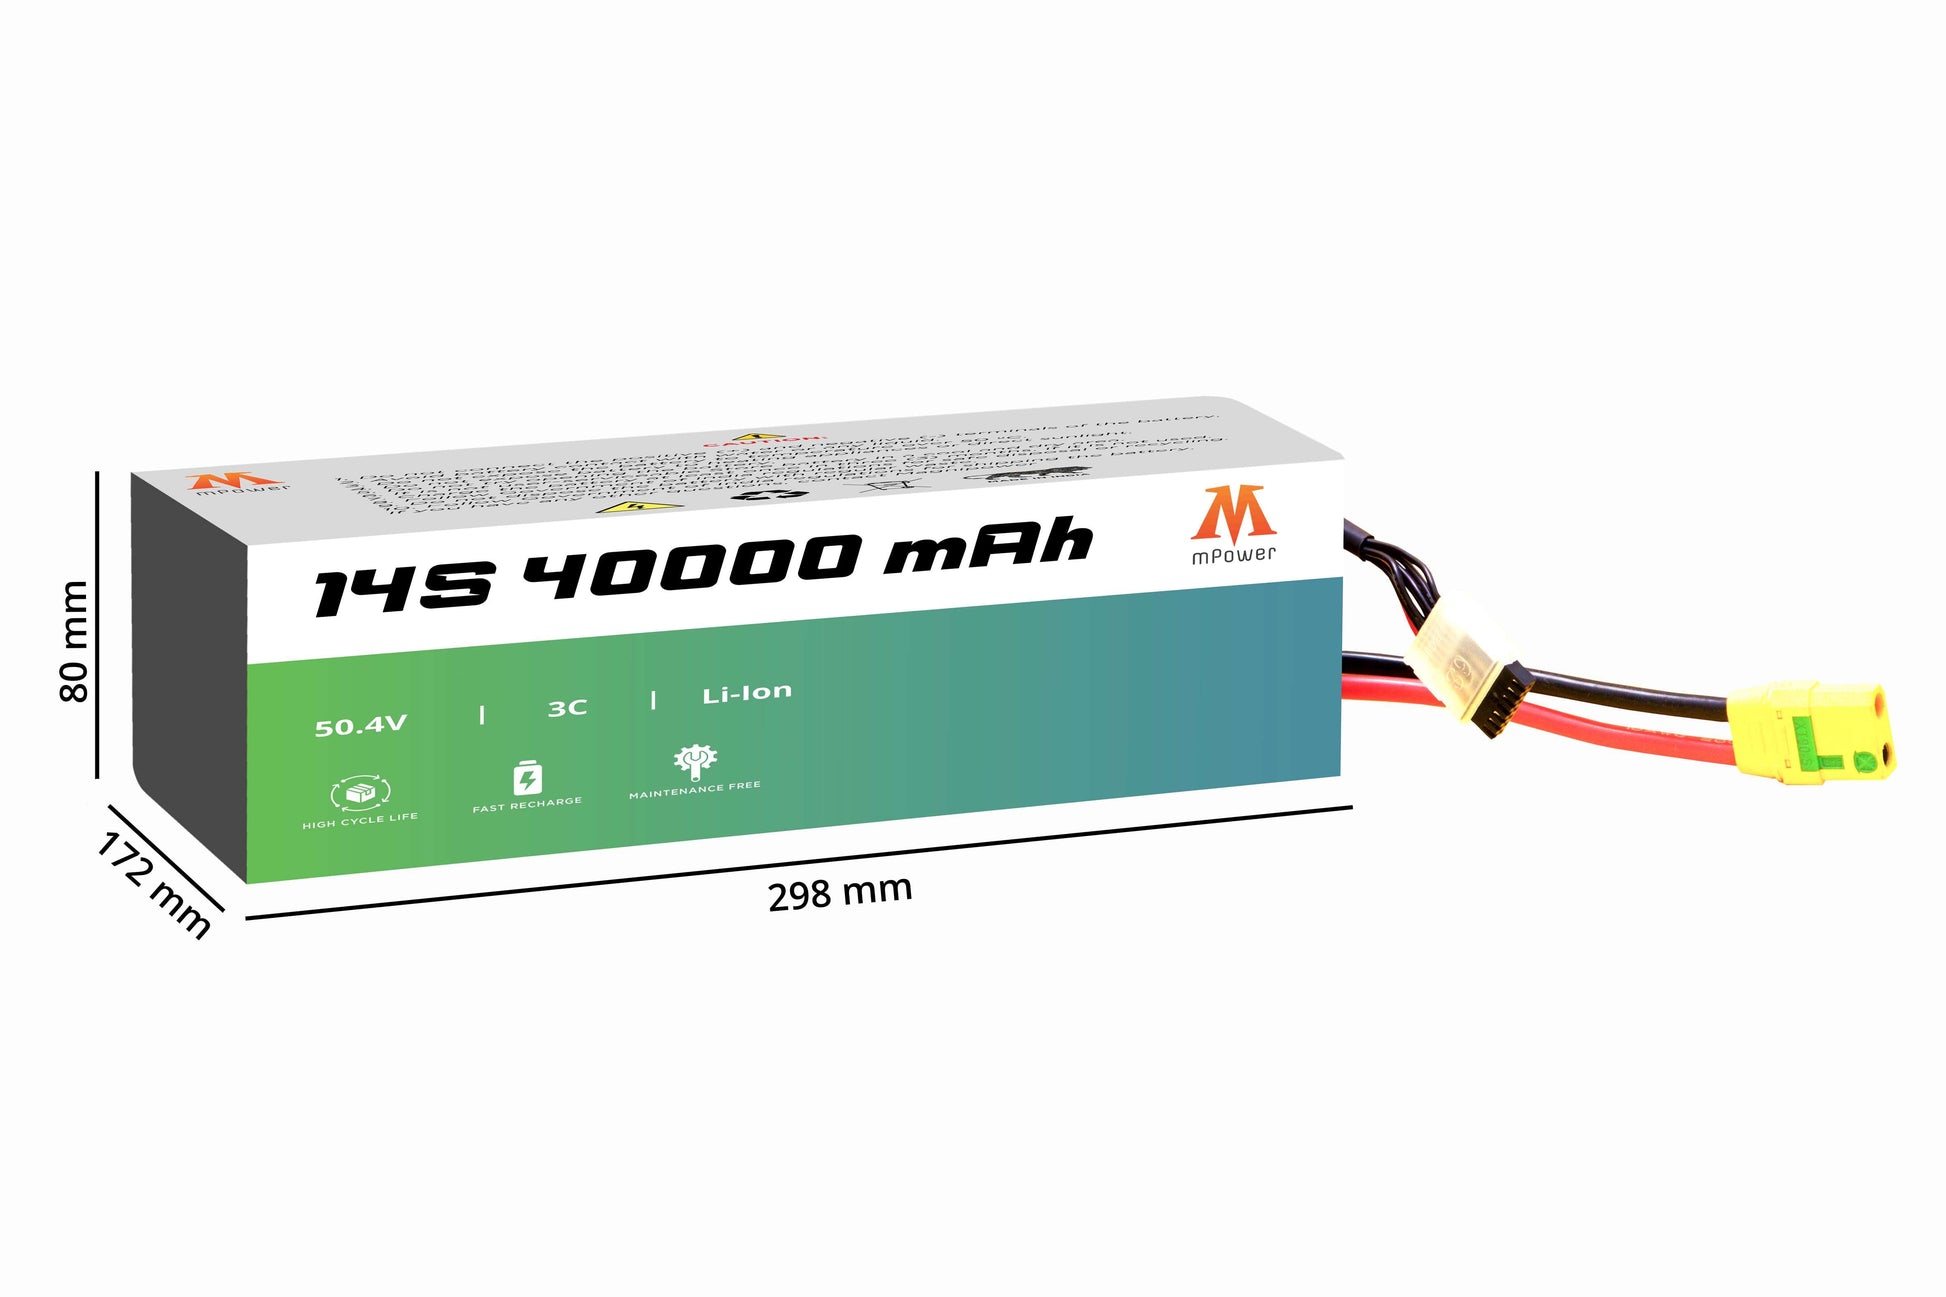 mPower 14S 40000mAh Lithium-Ion Battery for Delivery Drones-mpowerlithium